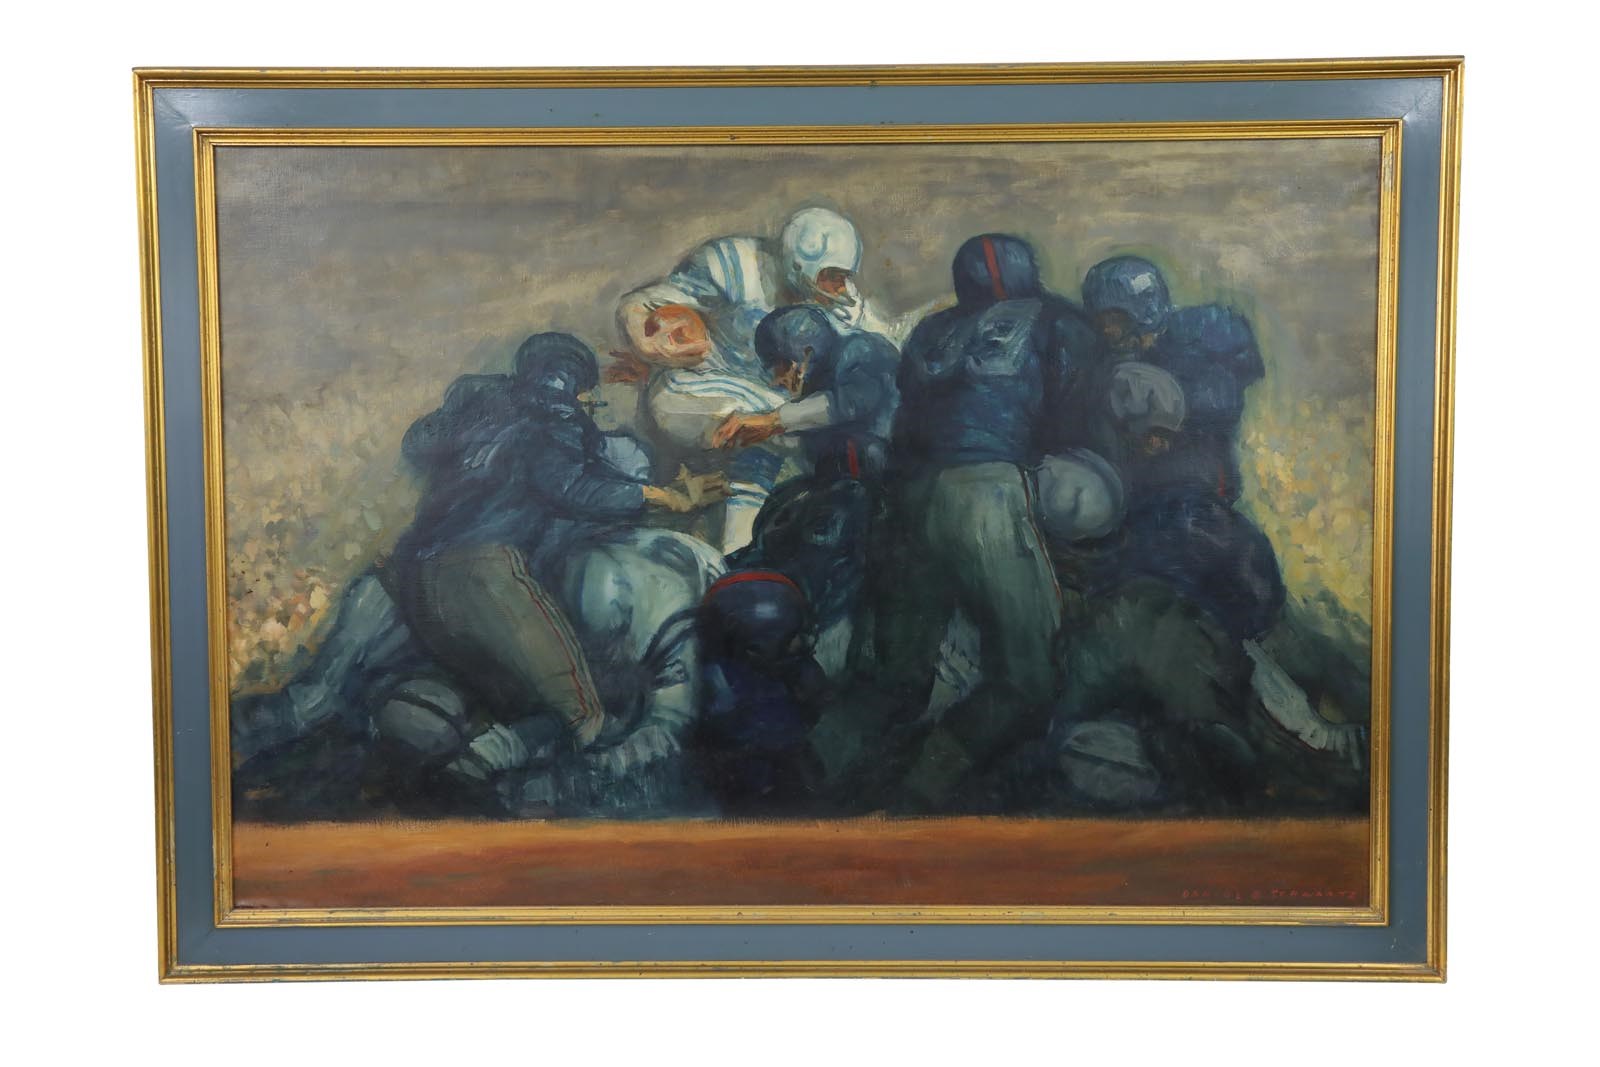 1958 "Greatest Game Ever Played" Oil on Canvas by Daniel Schwartz - Published in 1960 Esquire